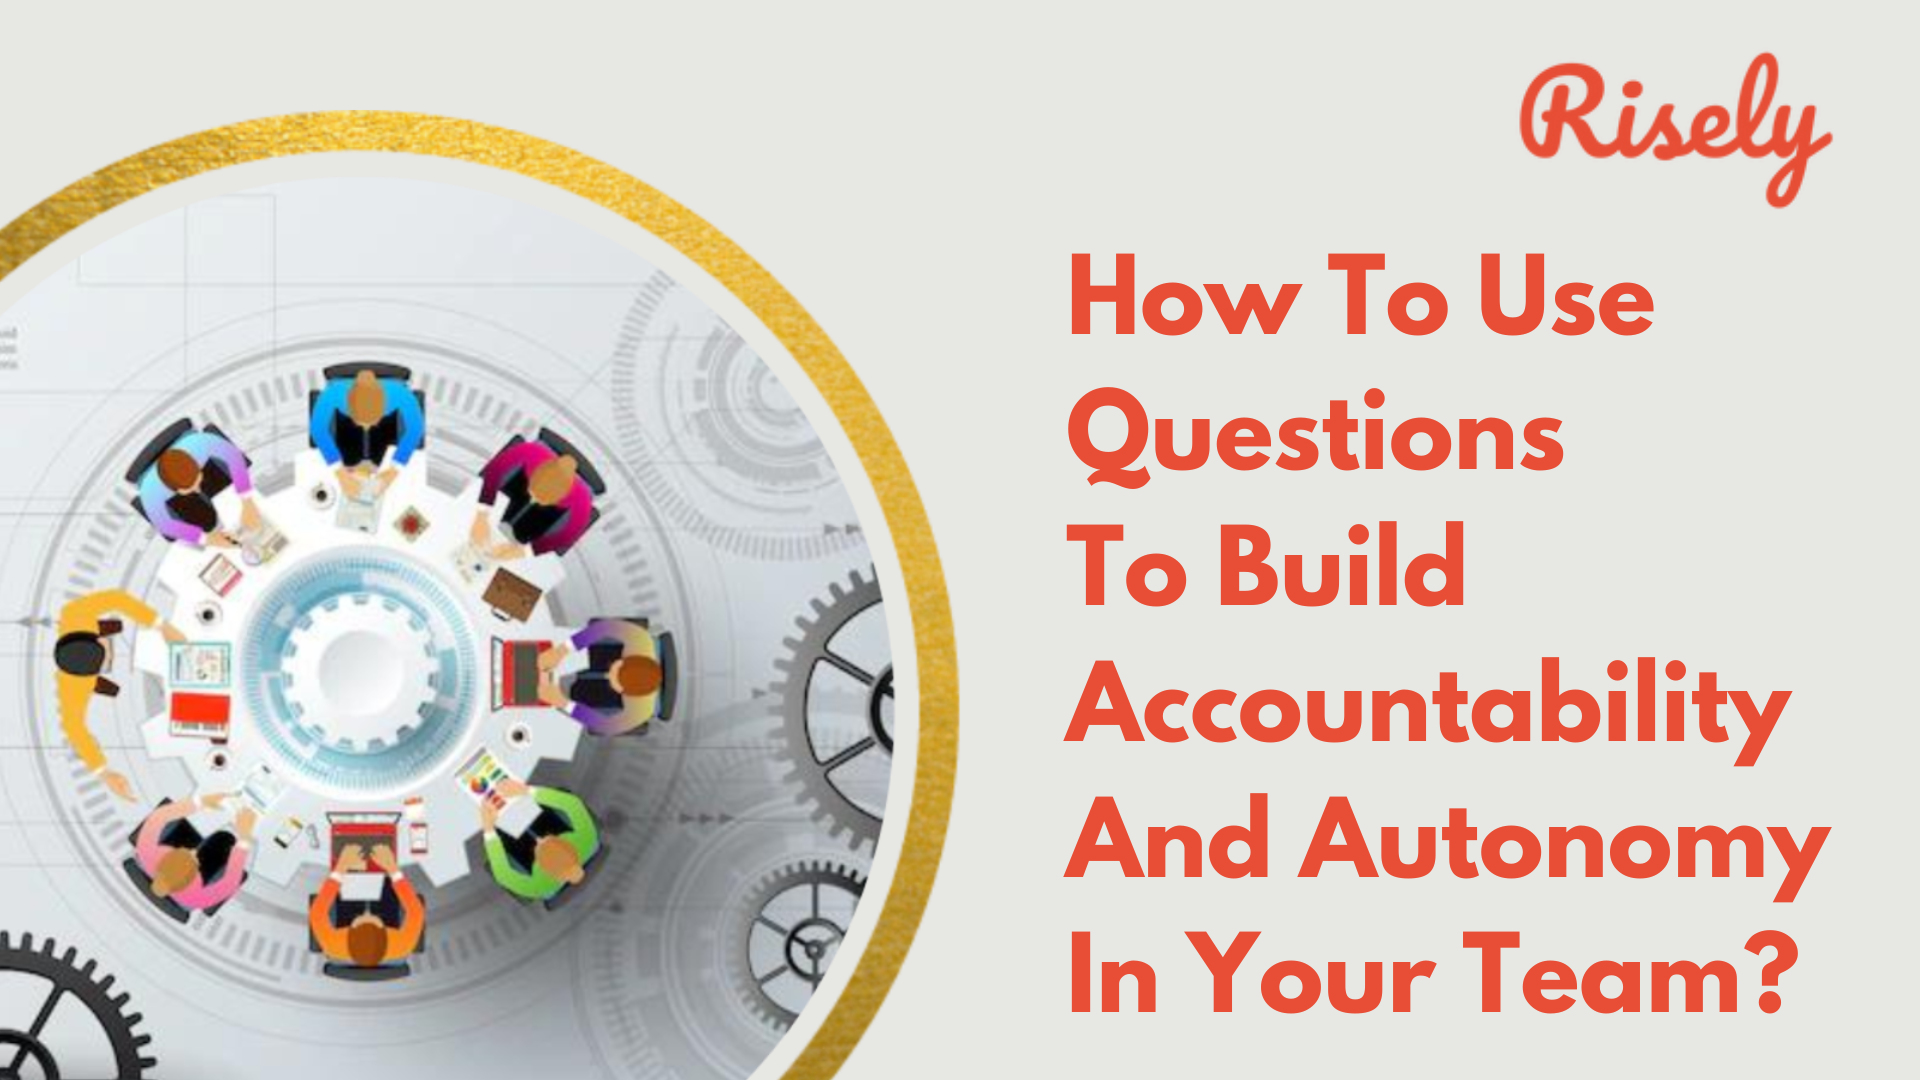 How To Use Questions To Build Accountability And Autonomy In Your Team?